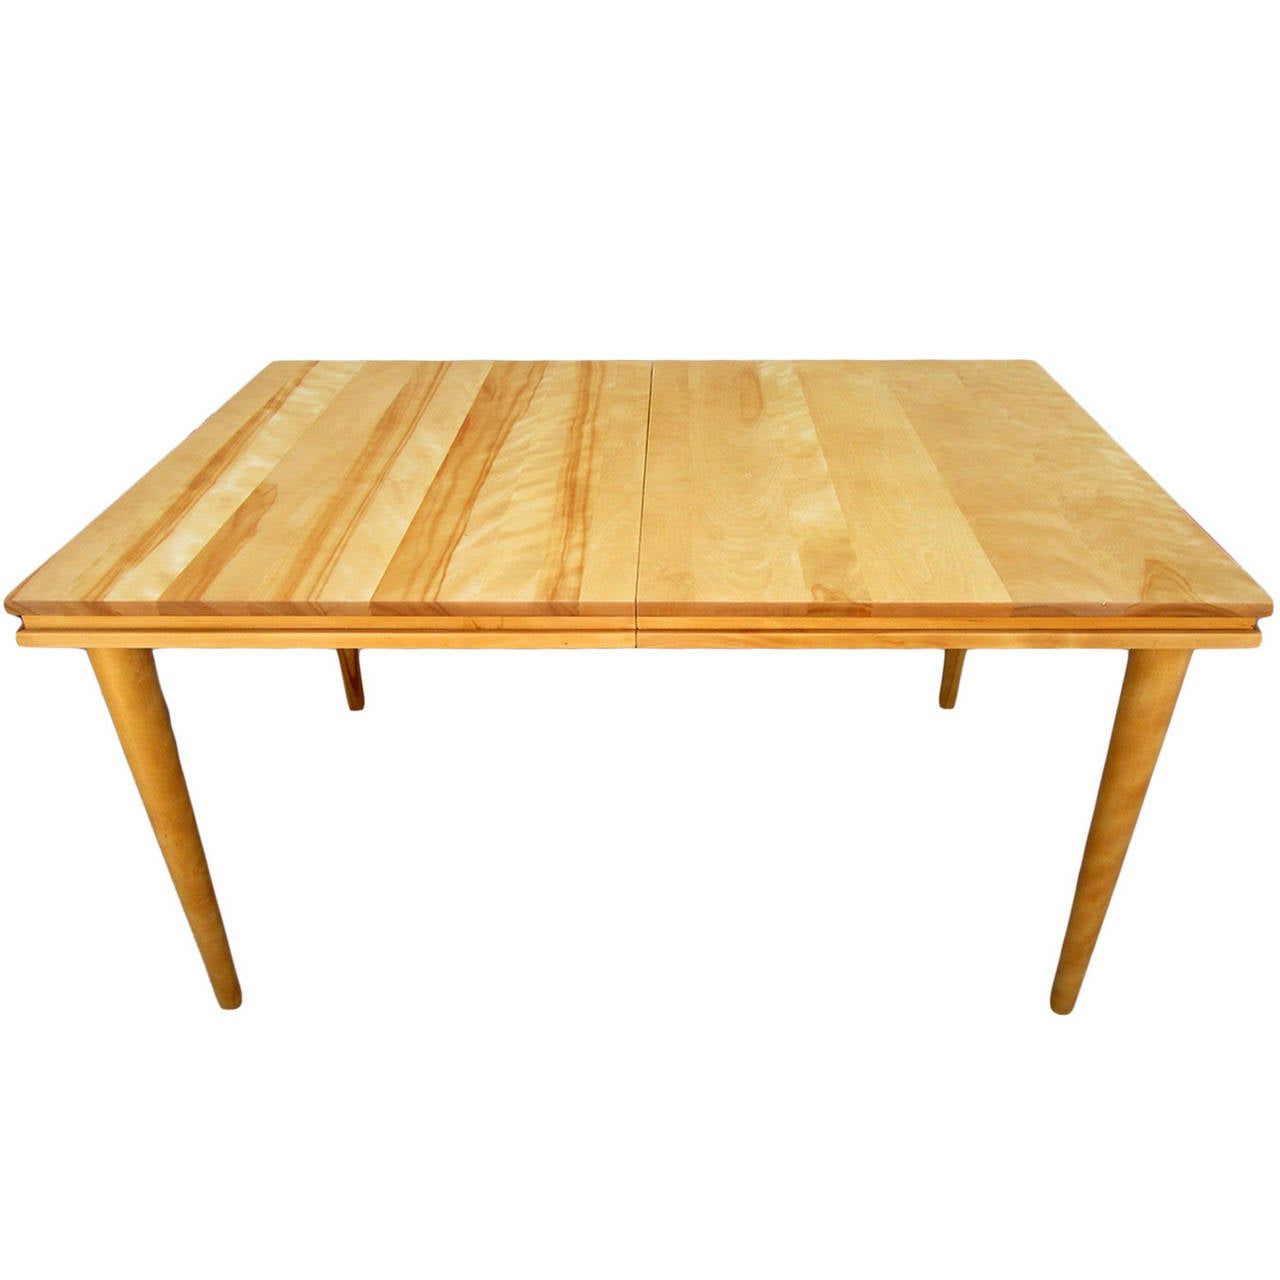 Gaspard Maple Solid Wood Pedestal Dining Tables For 2020 Russel Wright Solid Maple Dining Table At 1stdibs (View 16 of 20)